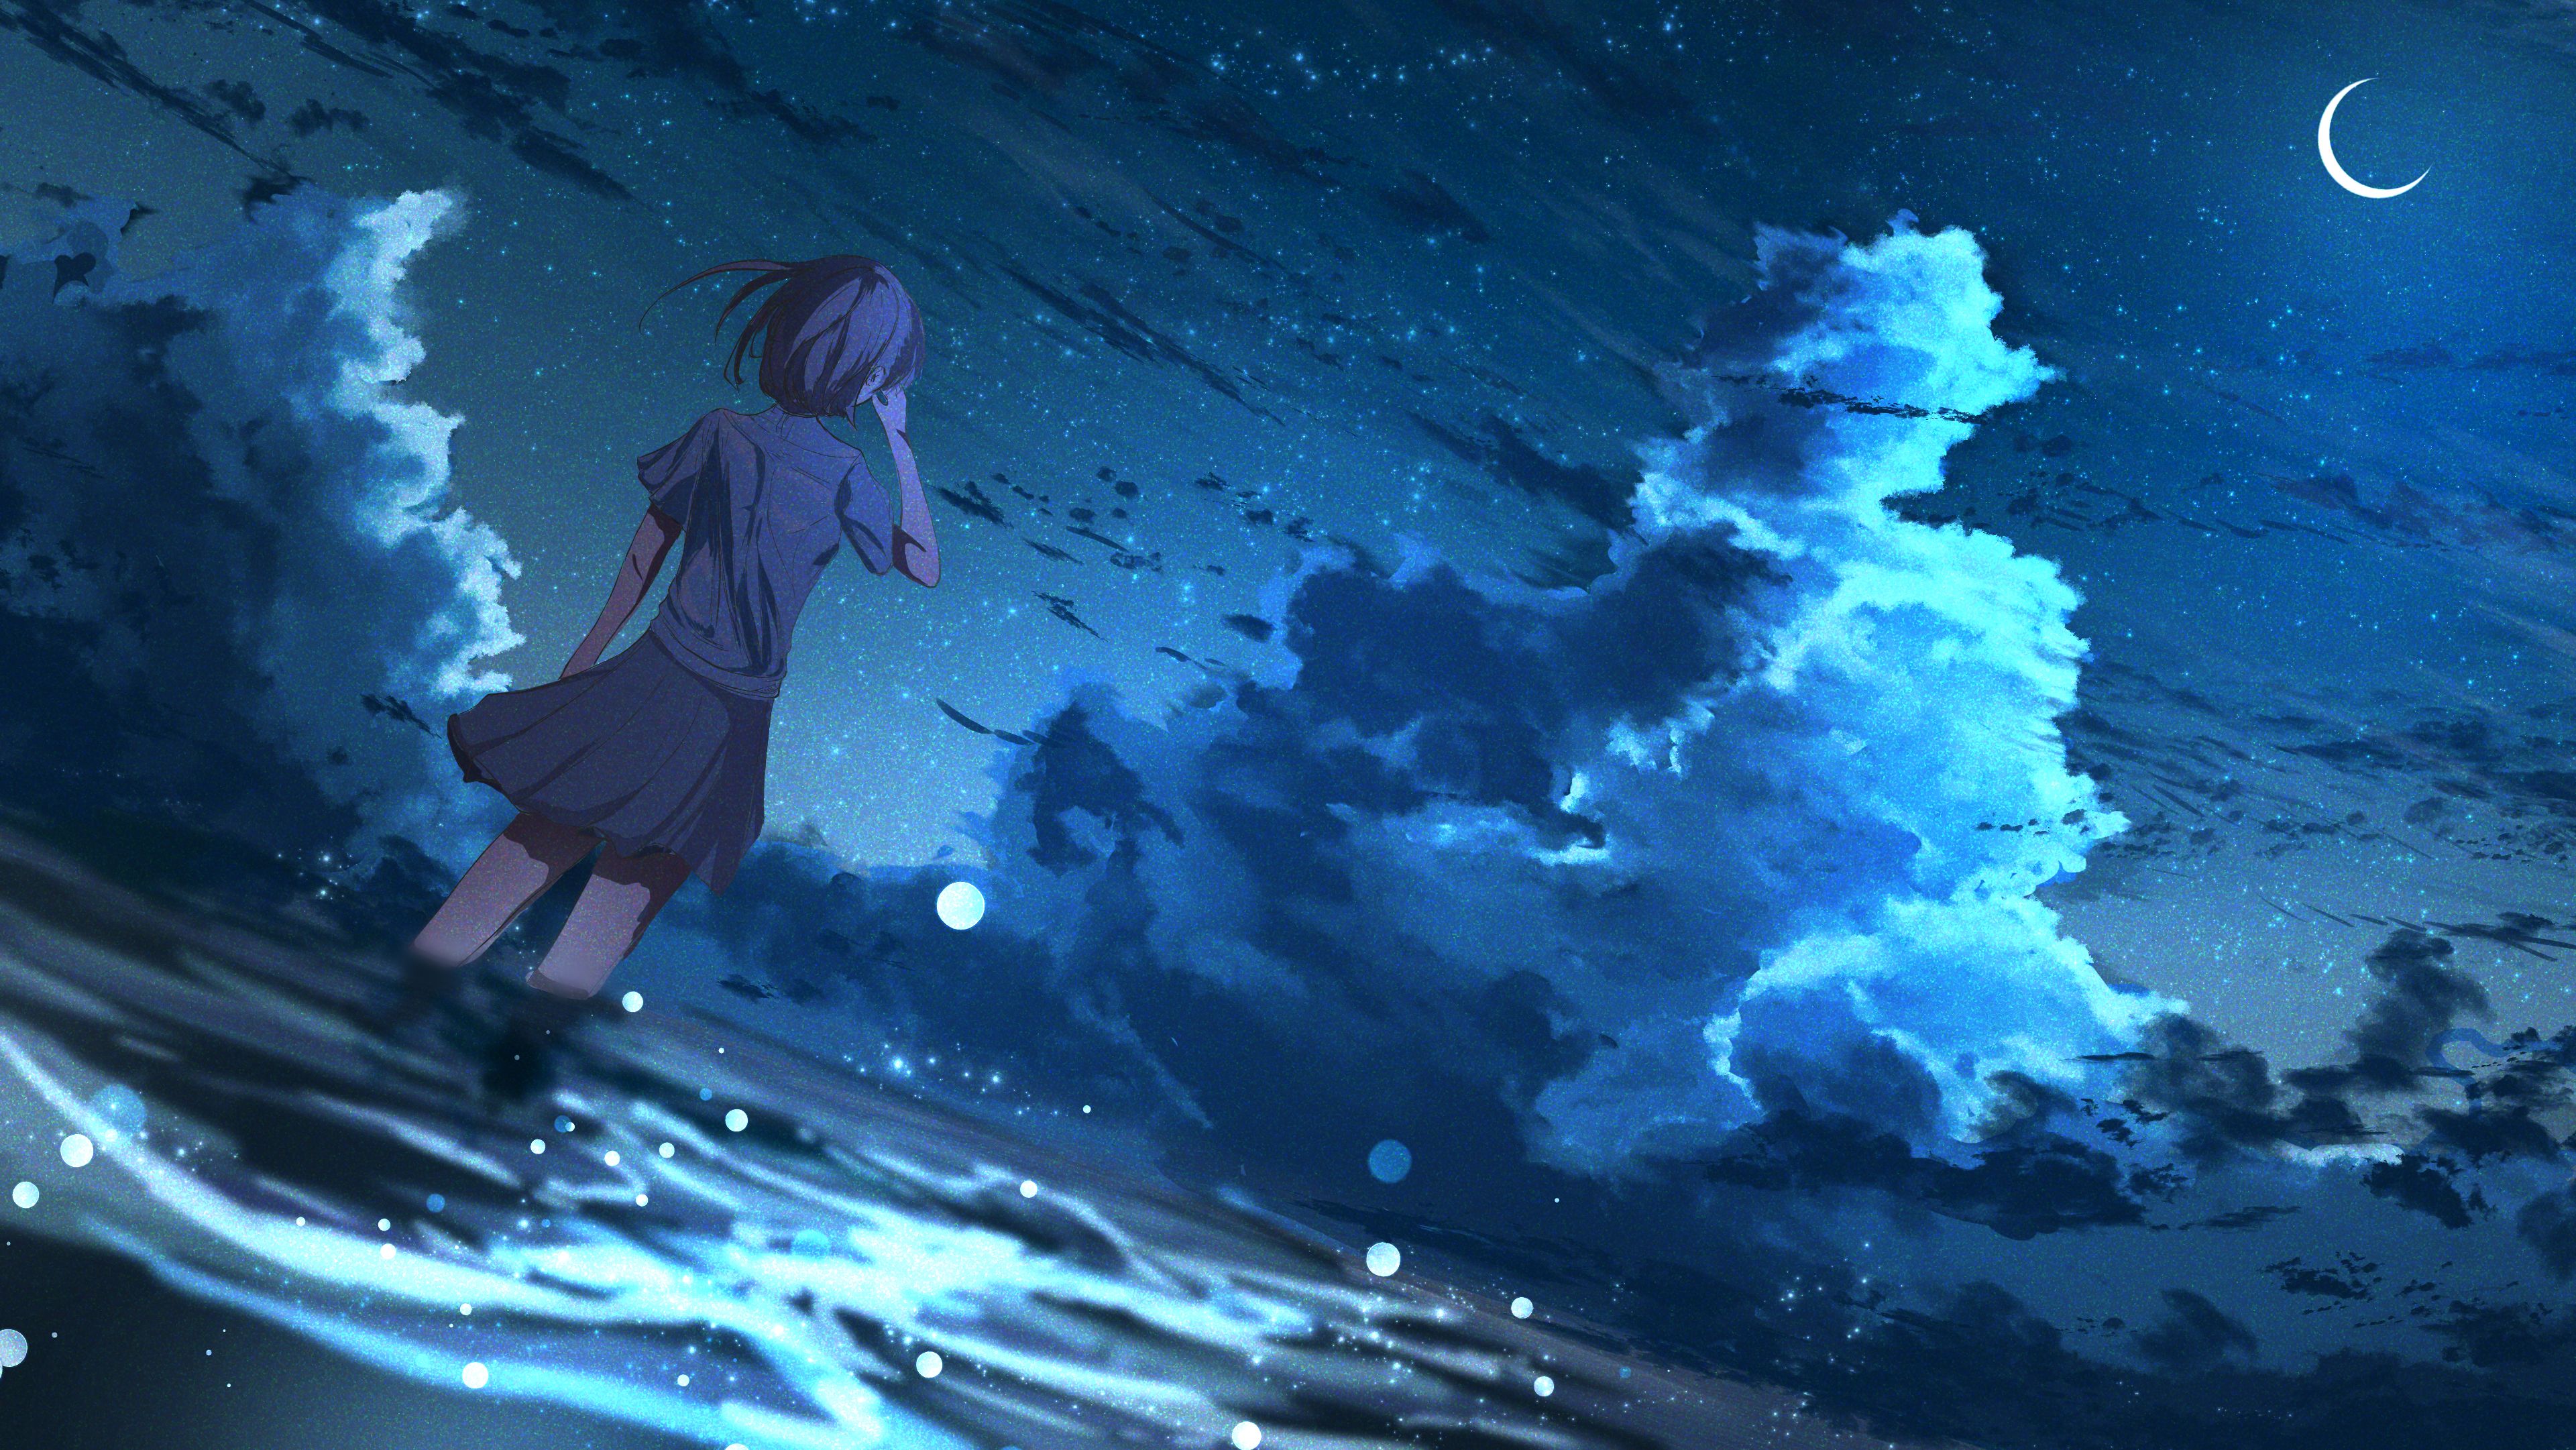 88300 download wallpaper anime, art, stars, night, girl, wind screensavers and pictures for free